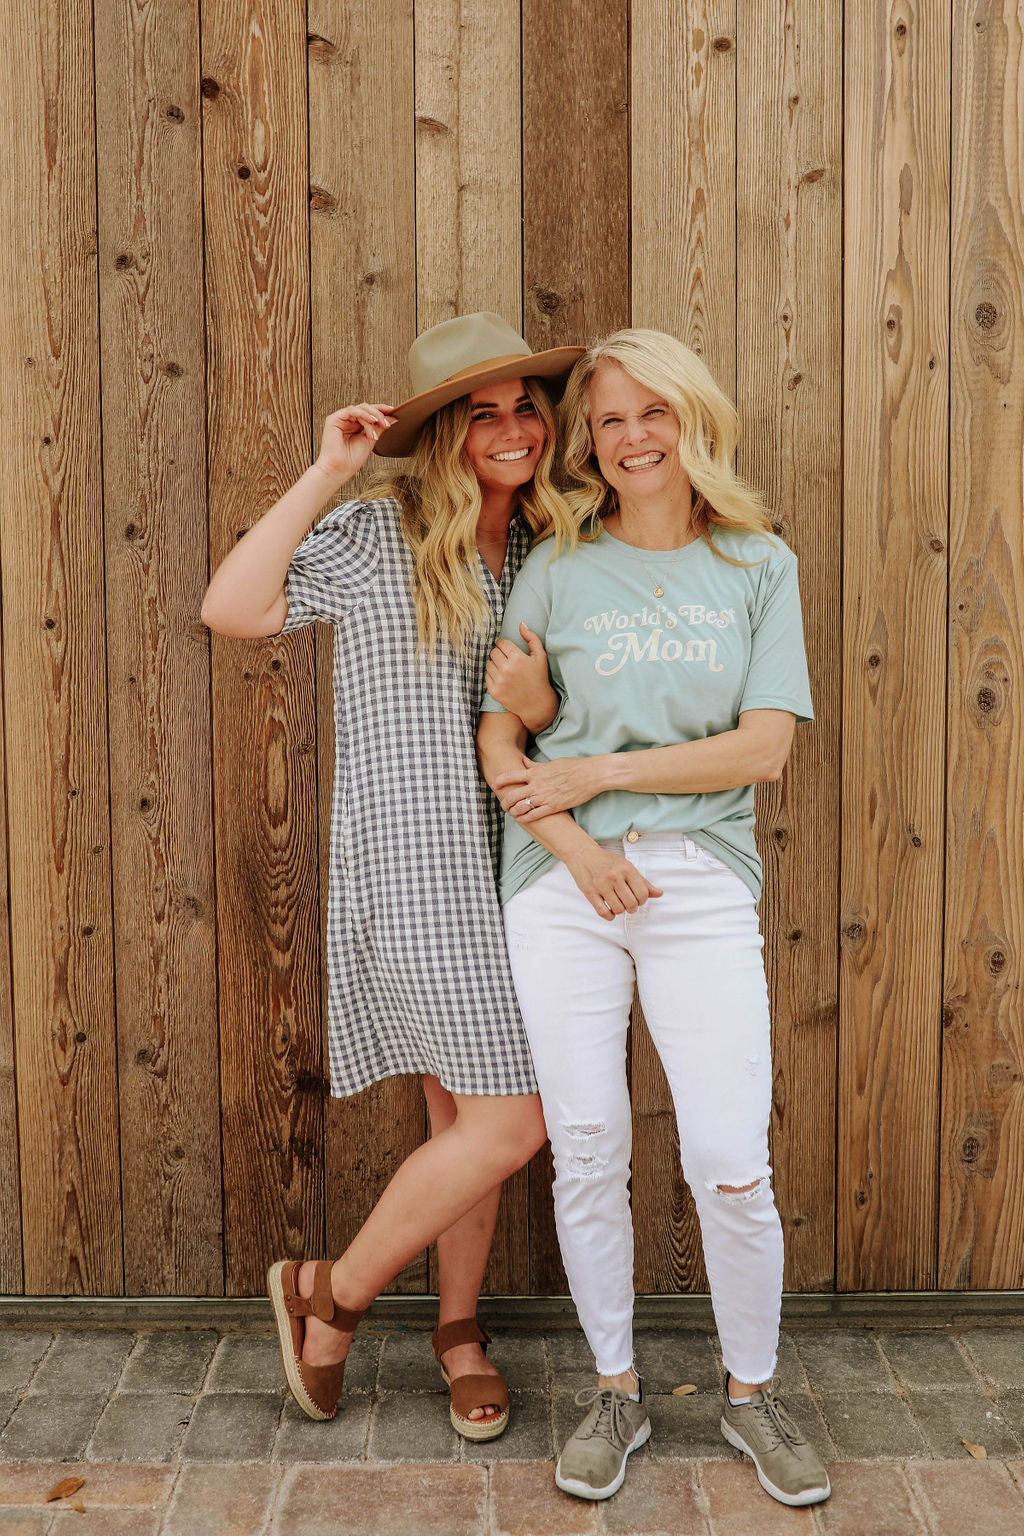 WORLD'S BEST MOM TEE IN TEAL